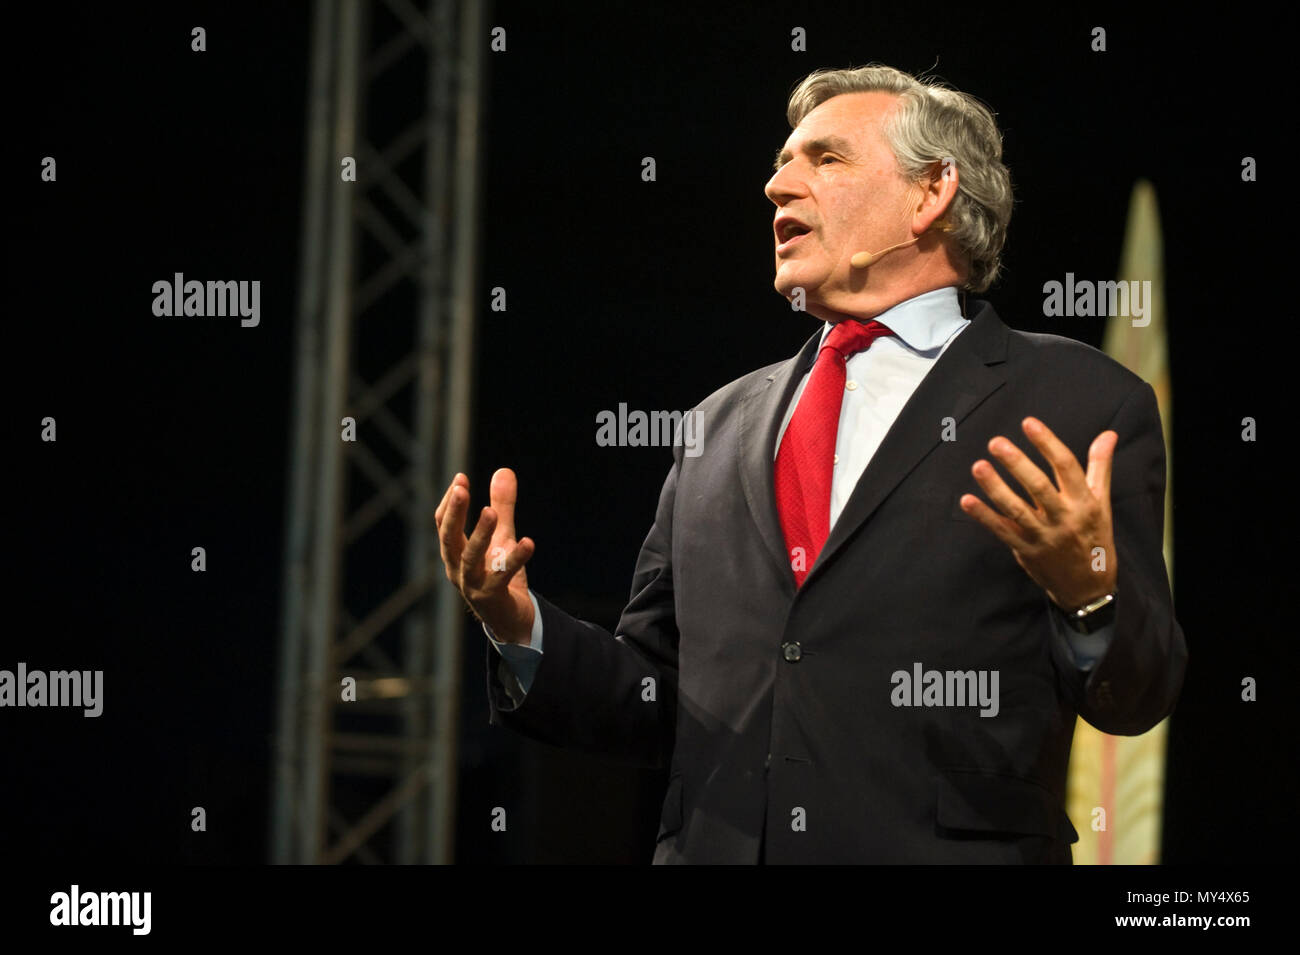 Gordon Brown former Prime Minister & leader of the Labour Party speaking on stage at Hay Festival 2018 Hay-on-Wye Powys Wales UK Stock Photo